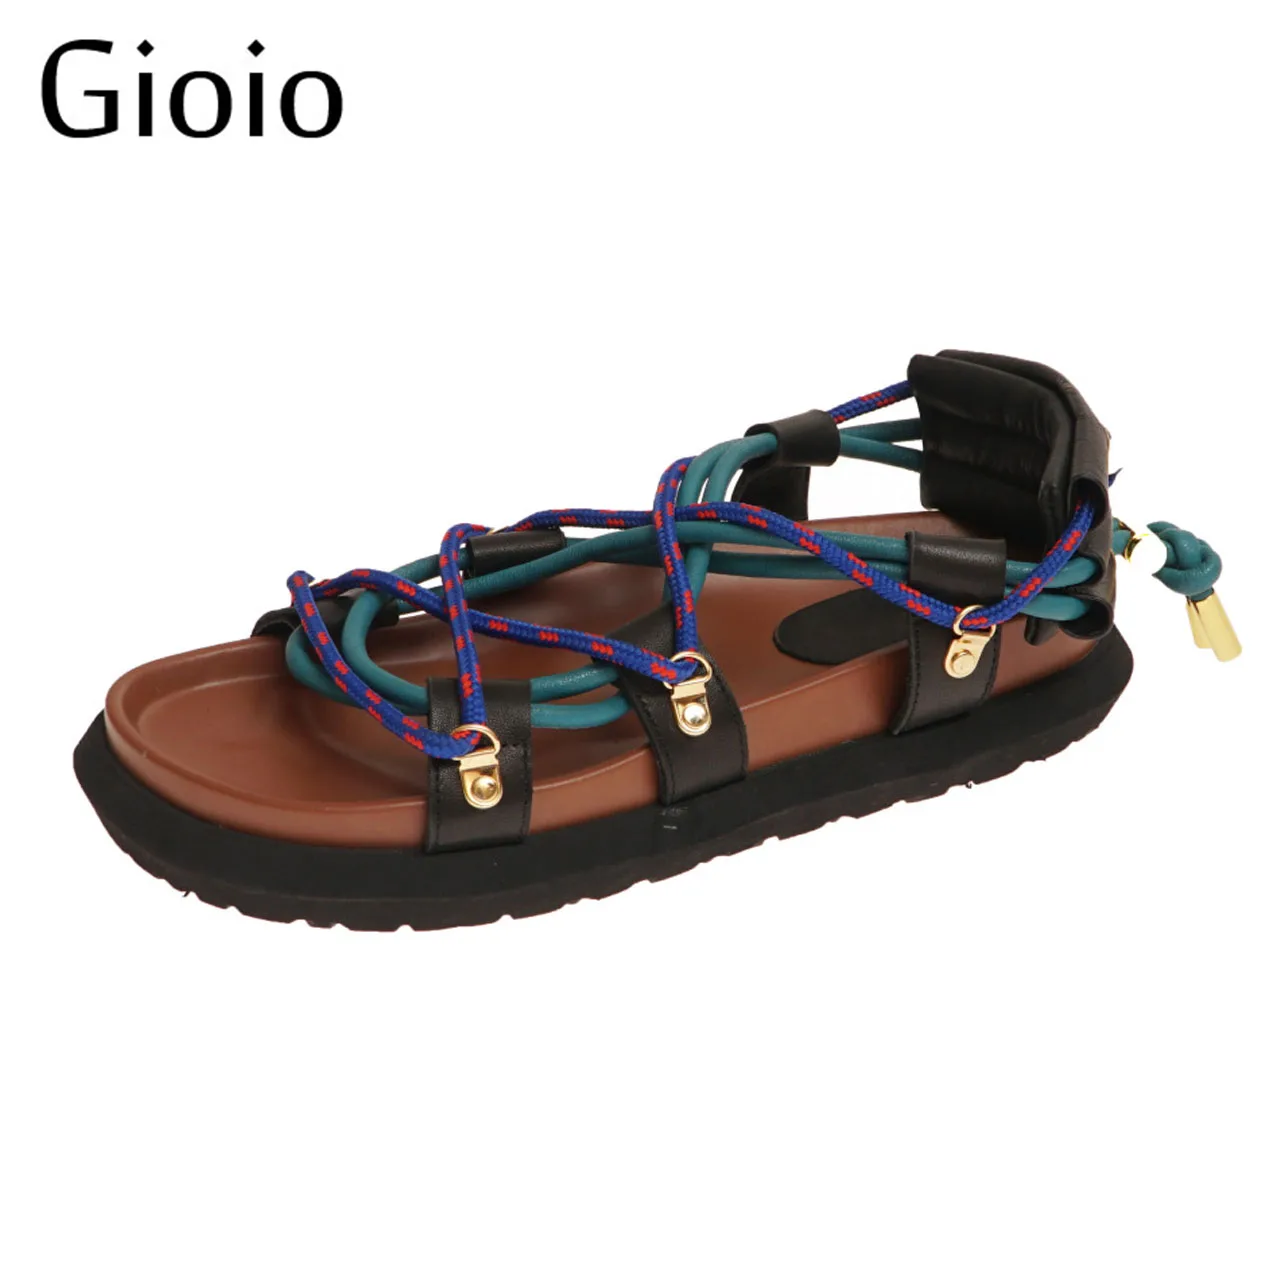 Gioio Women Sandals Plus Size Wedges Shoes For Women Summer Beach Non-slip Beach Open Toe Breathable Sandals Sport Style Shoes